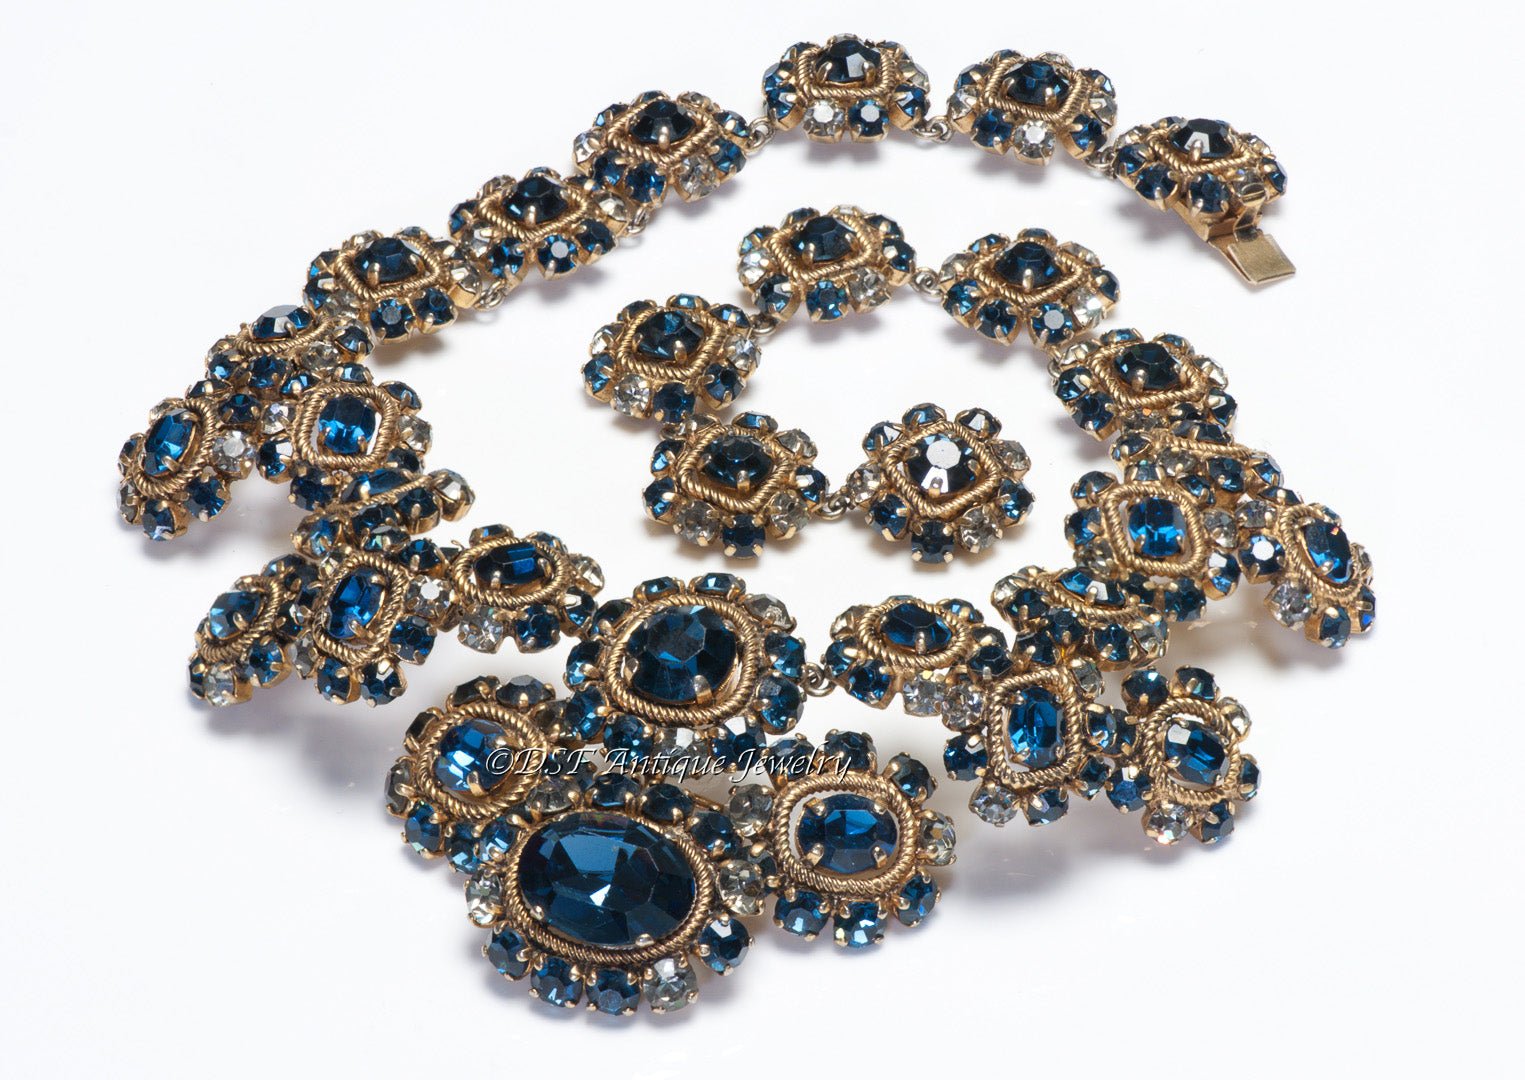 Christian Dior Paris Couture 1964 Henkel & Grosse Blue Crystal Collar Necklace